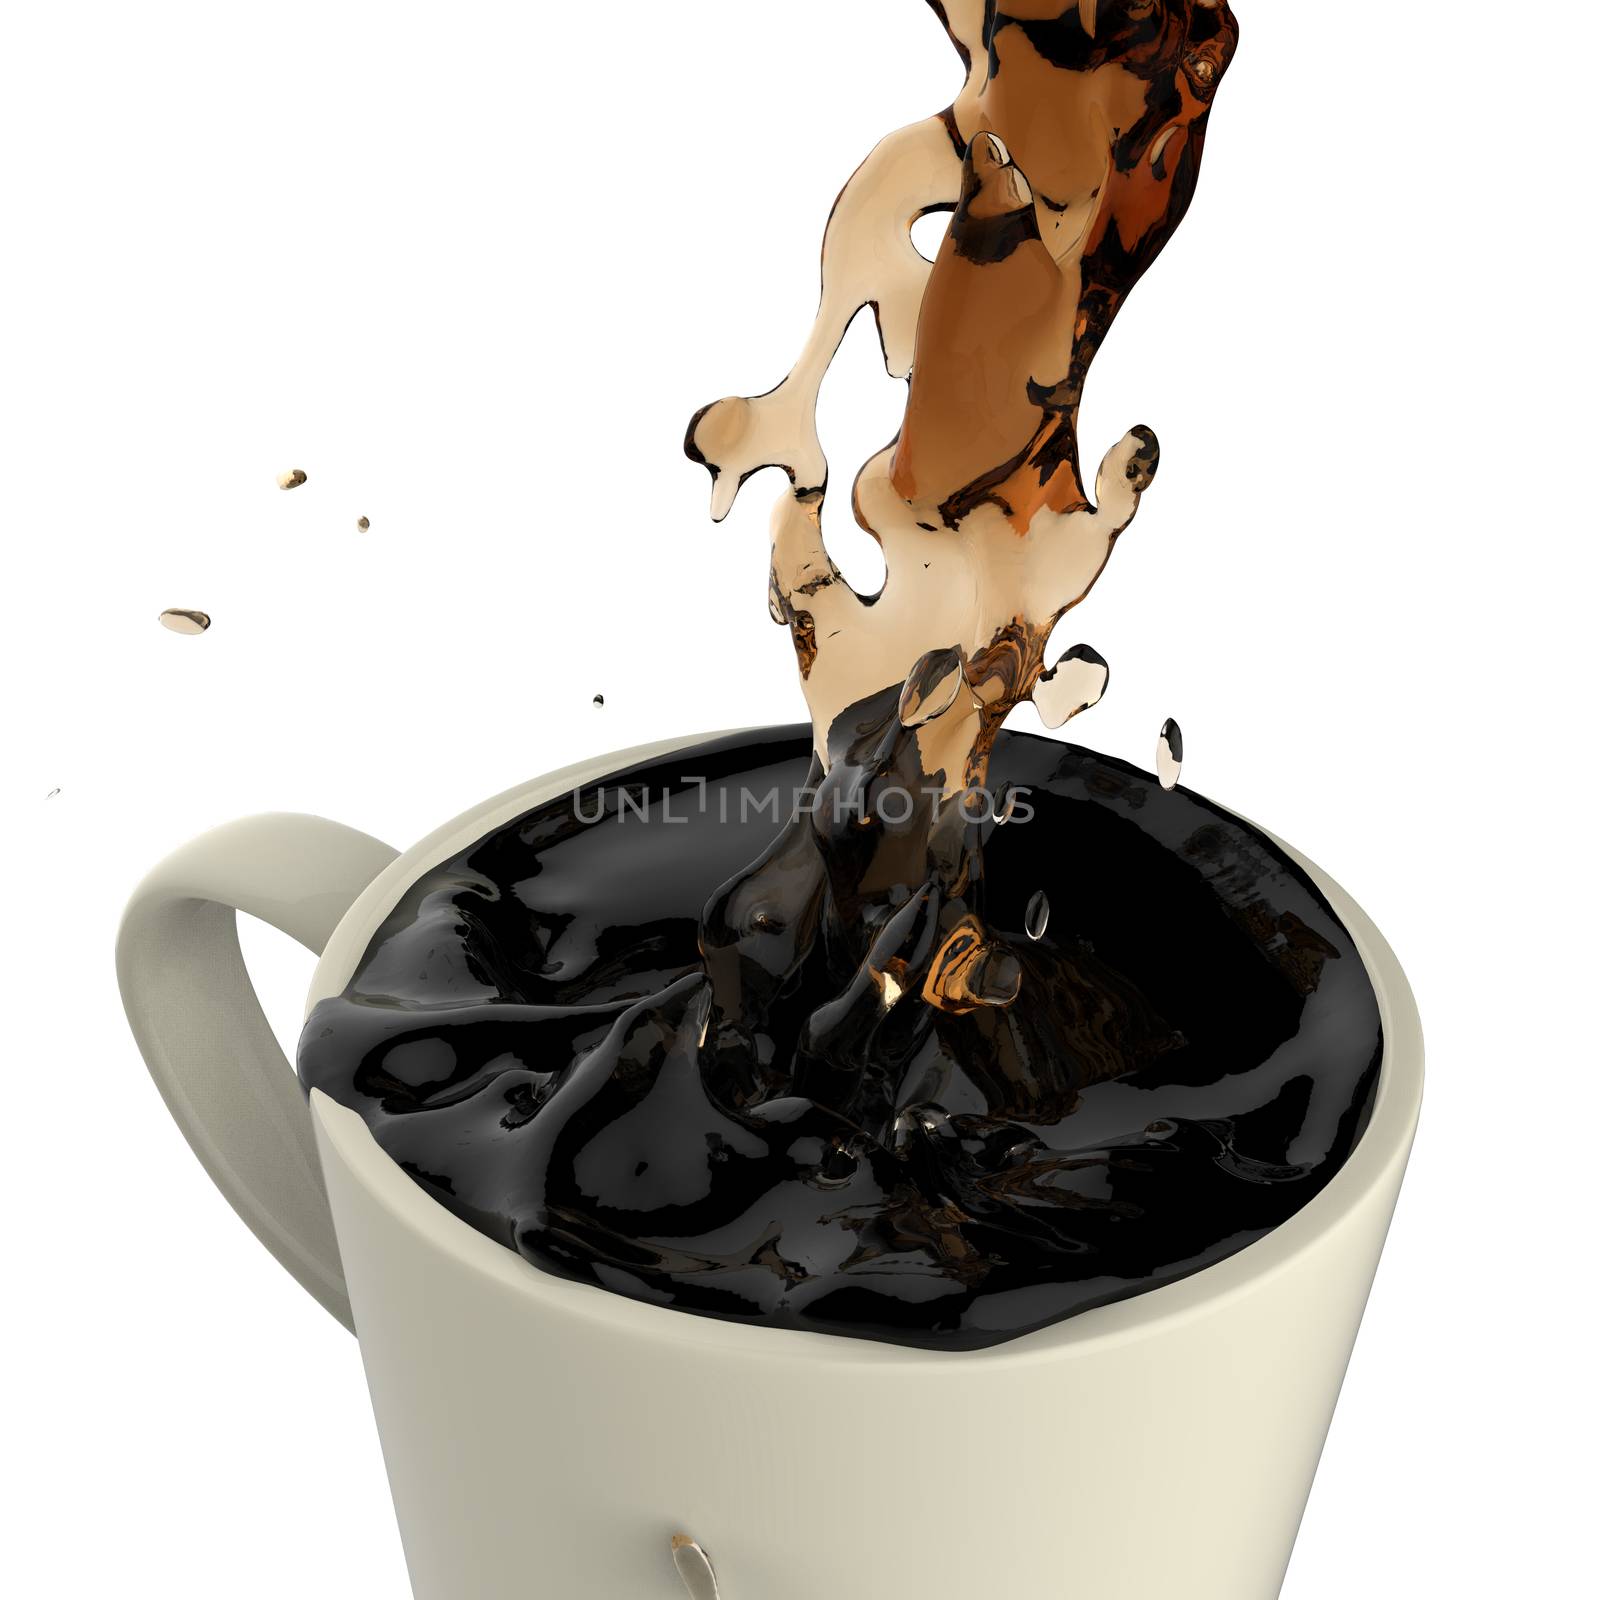 pouring coffee splashing into red mug. 3d on white background